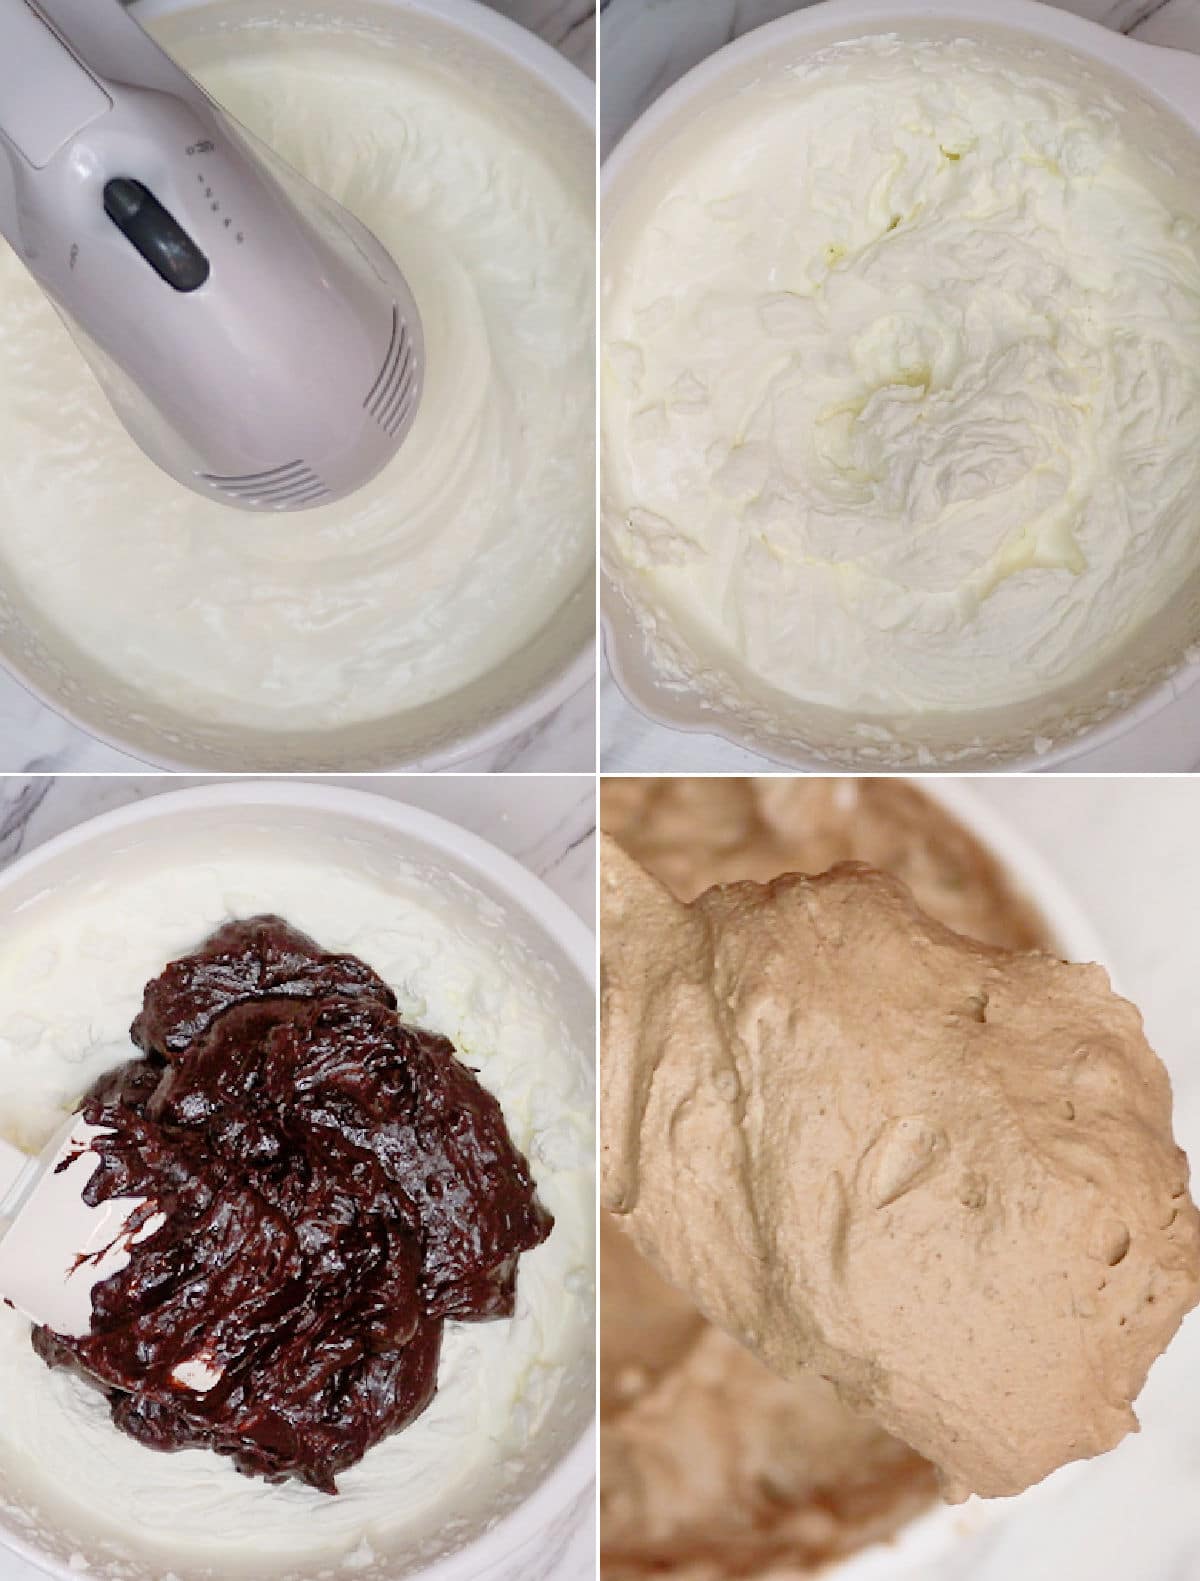 Whipped cream and Chocolate Process